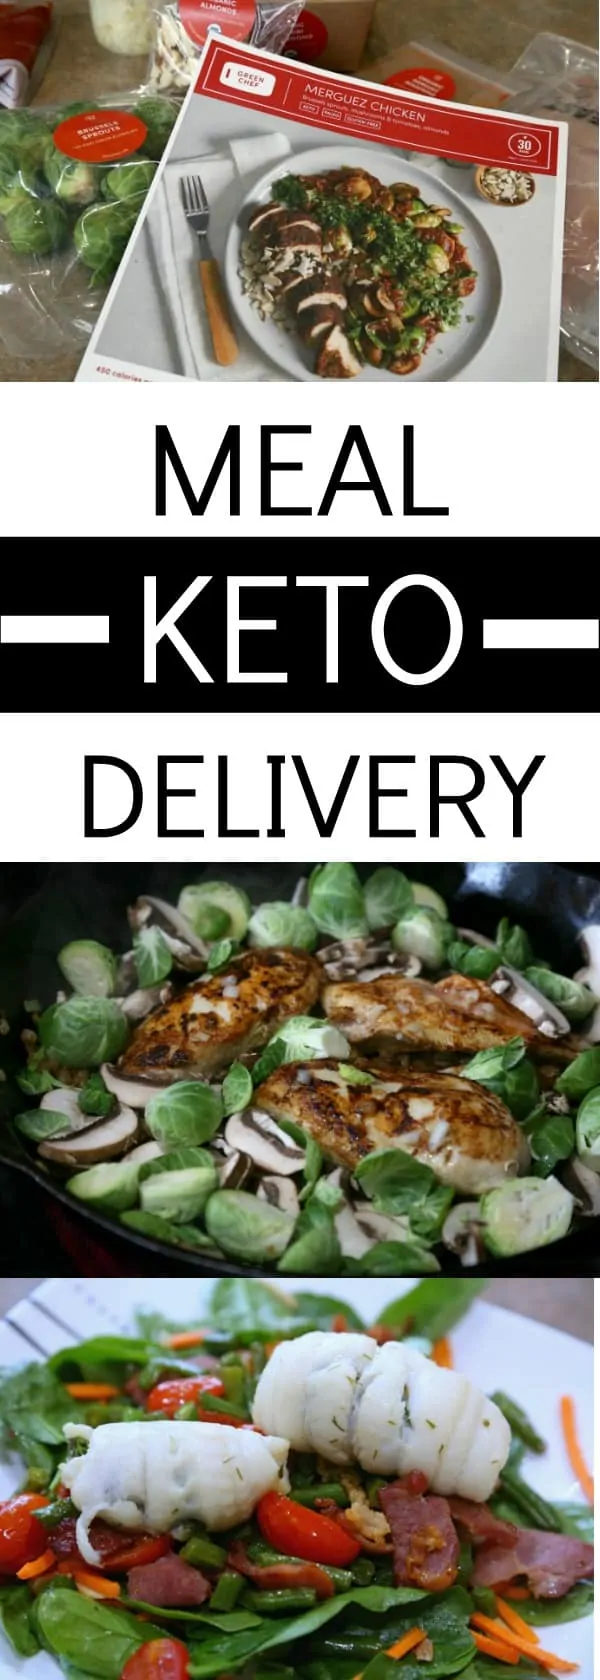 Keto Meal Delivery Review